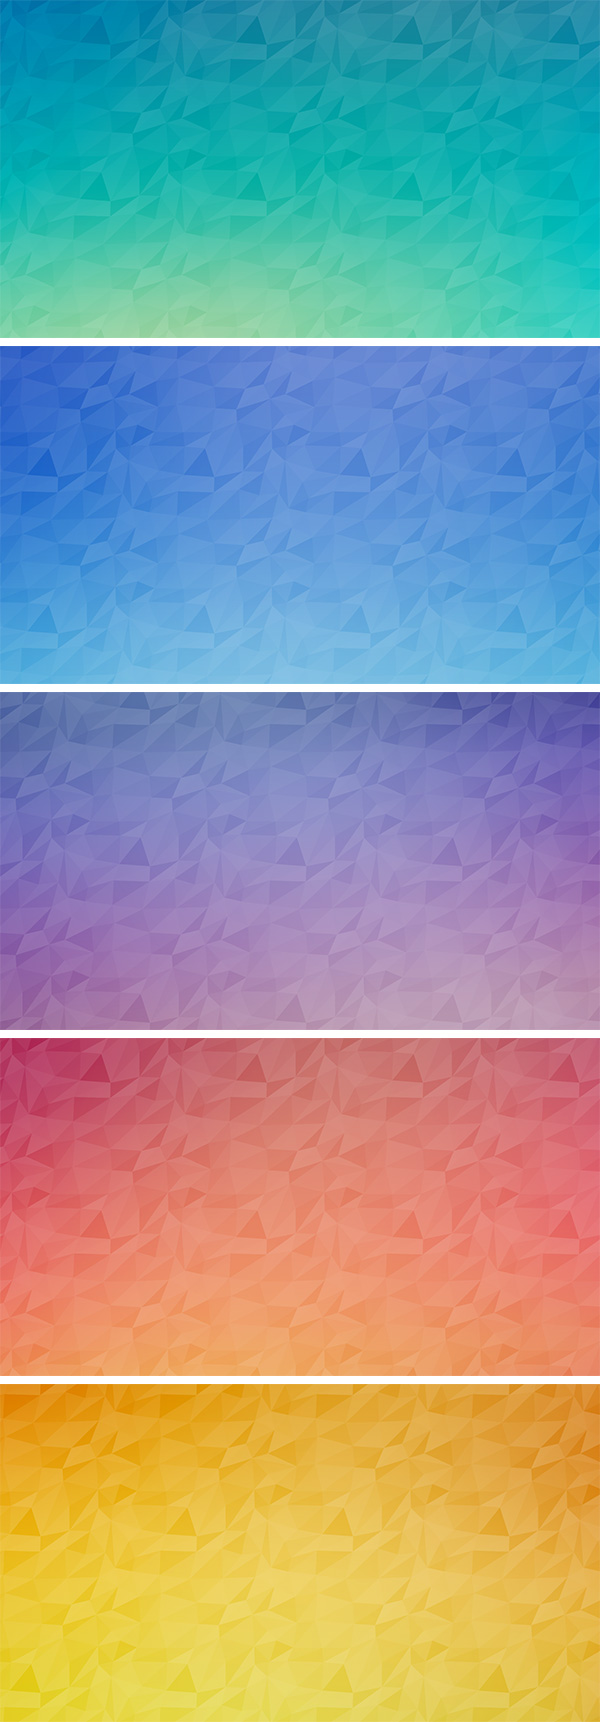 Seamless Polygon Backgrounds Vol.2